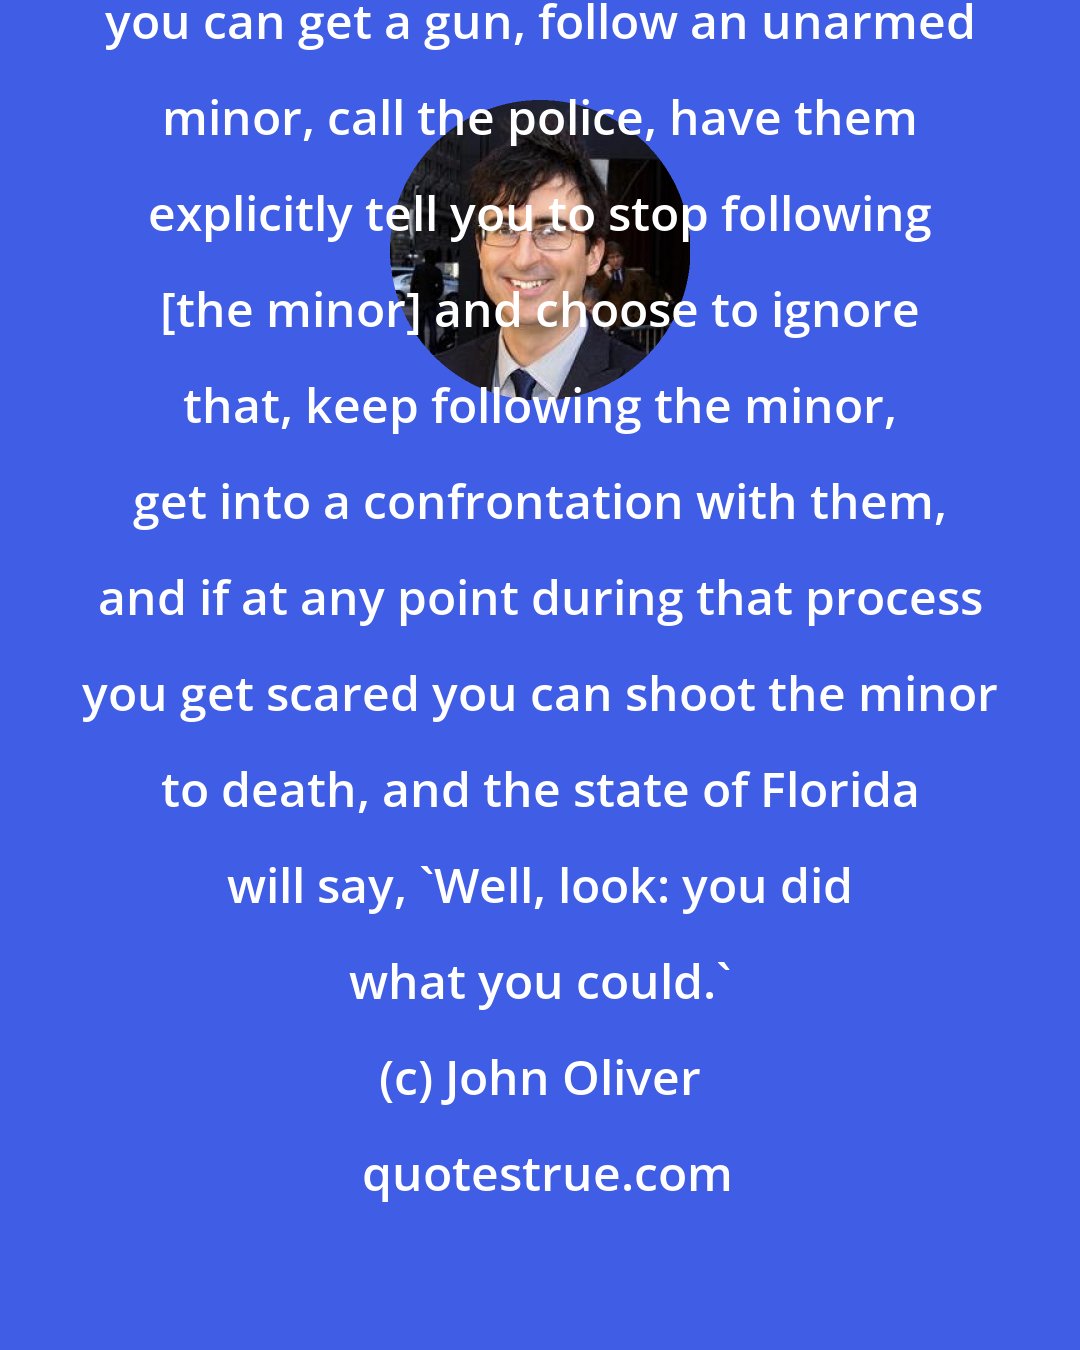 John Oliver: According to current Florida law you can get a gun, follow an unarmed minor, call the police, have them explicitly tell you to stop following [the minor] and choose to ignore that, keep following the minor, get into a confrontation with them, and if at any point during that process you get scared you can shoot the minor to death, and the state of Florida will say, 'Well, look: you did what you could.'